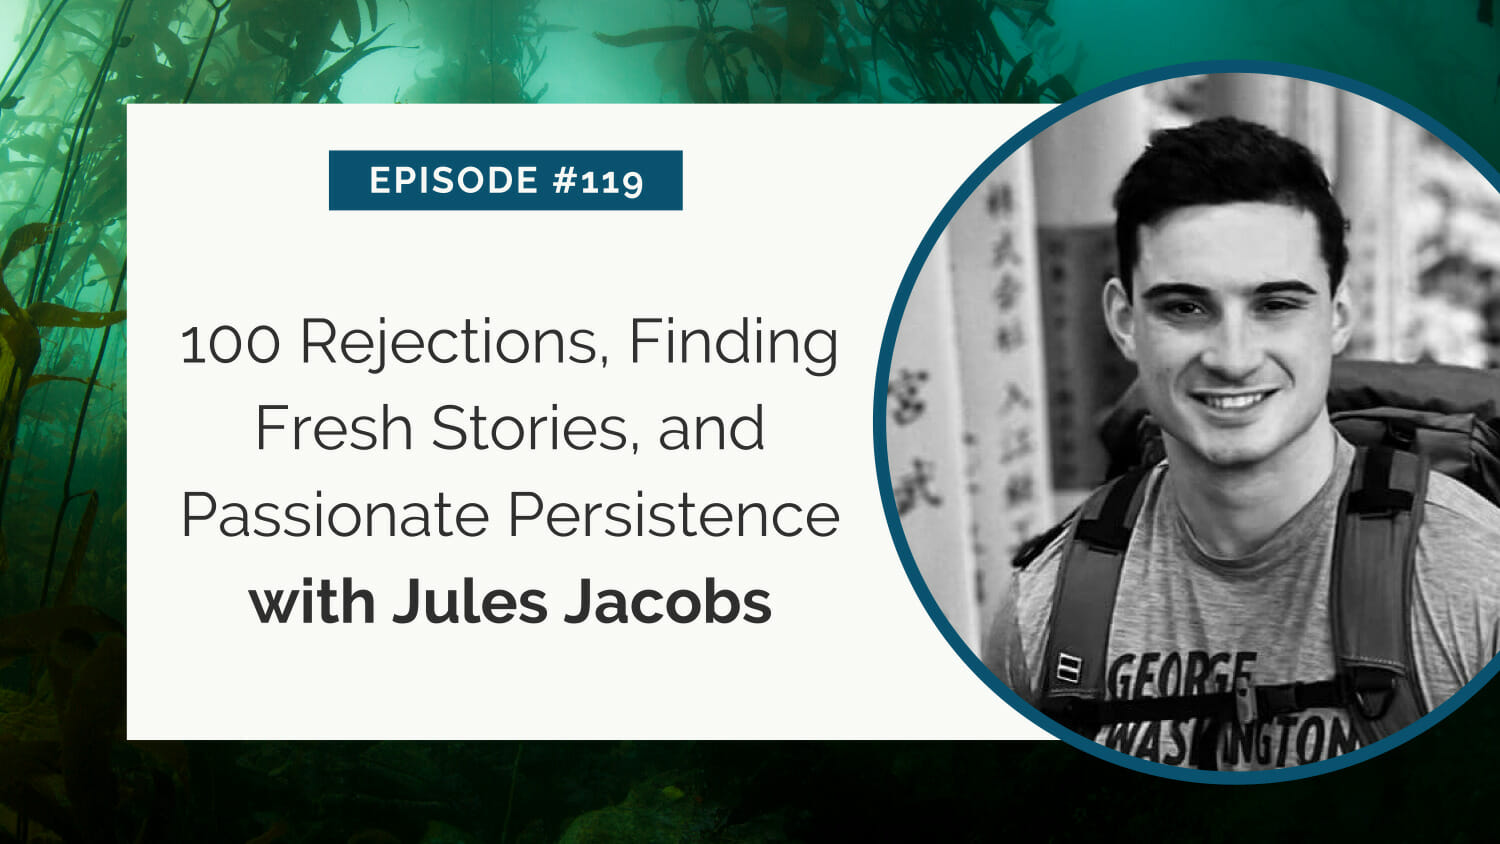 Podcast episode graphic featuring jules jacobs discussing rejections, storytelling, and persistence in episode 119.